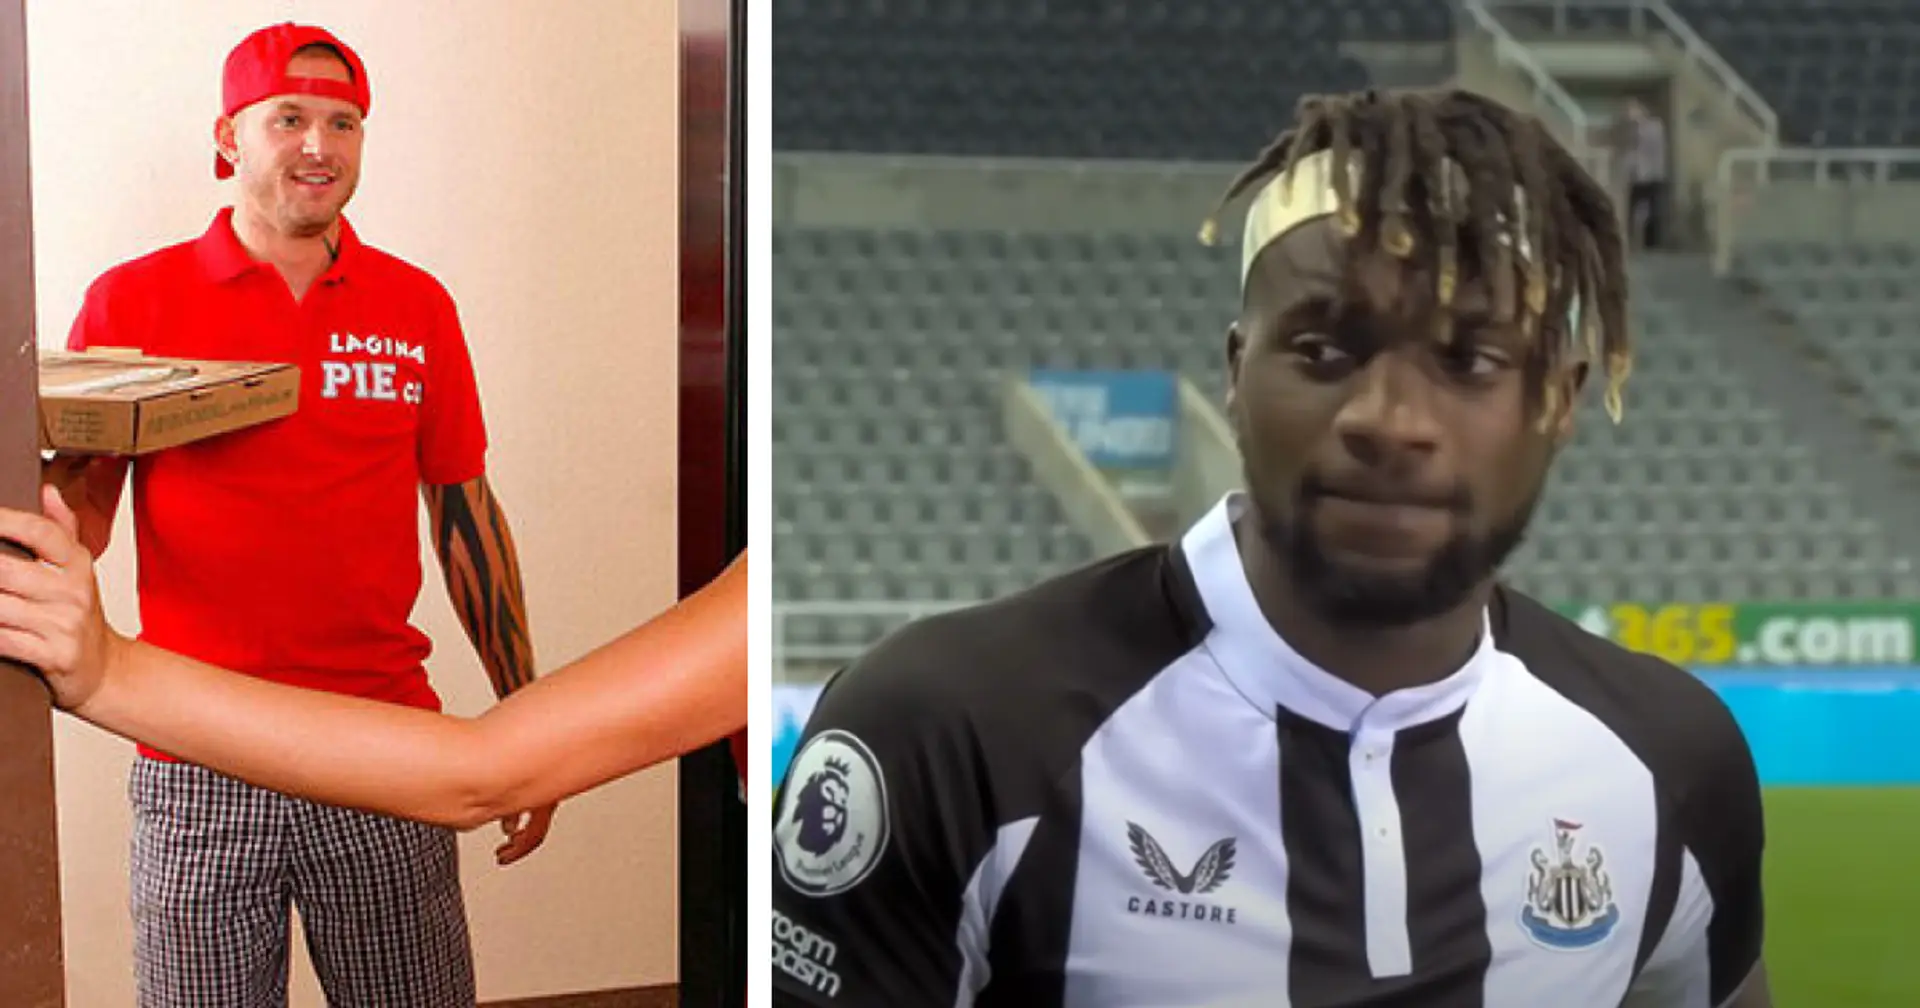 Pizza delivery guy provides accurate update on Saint-Maximin's future